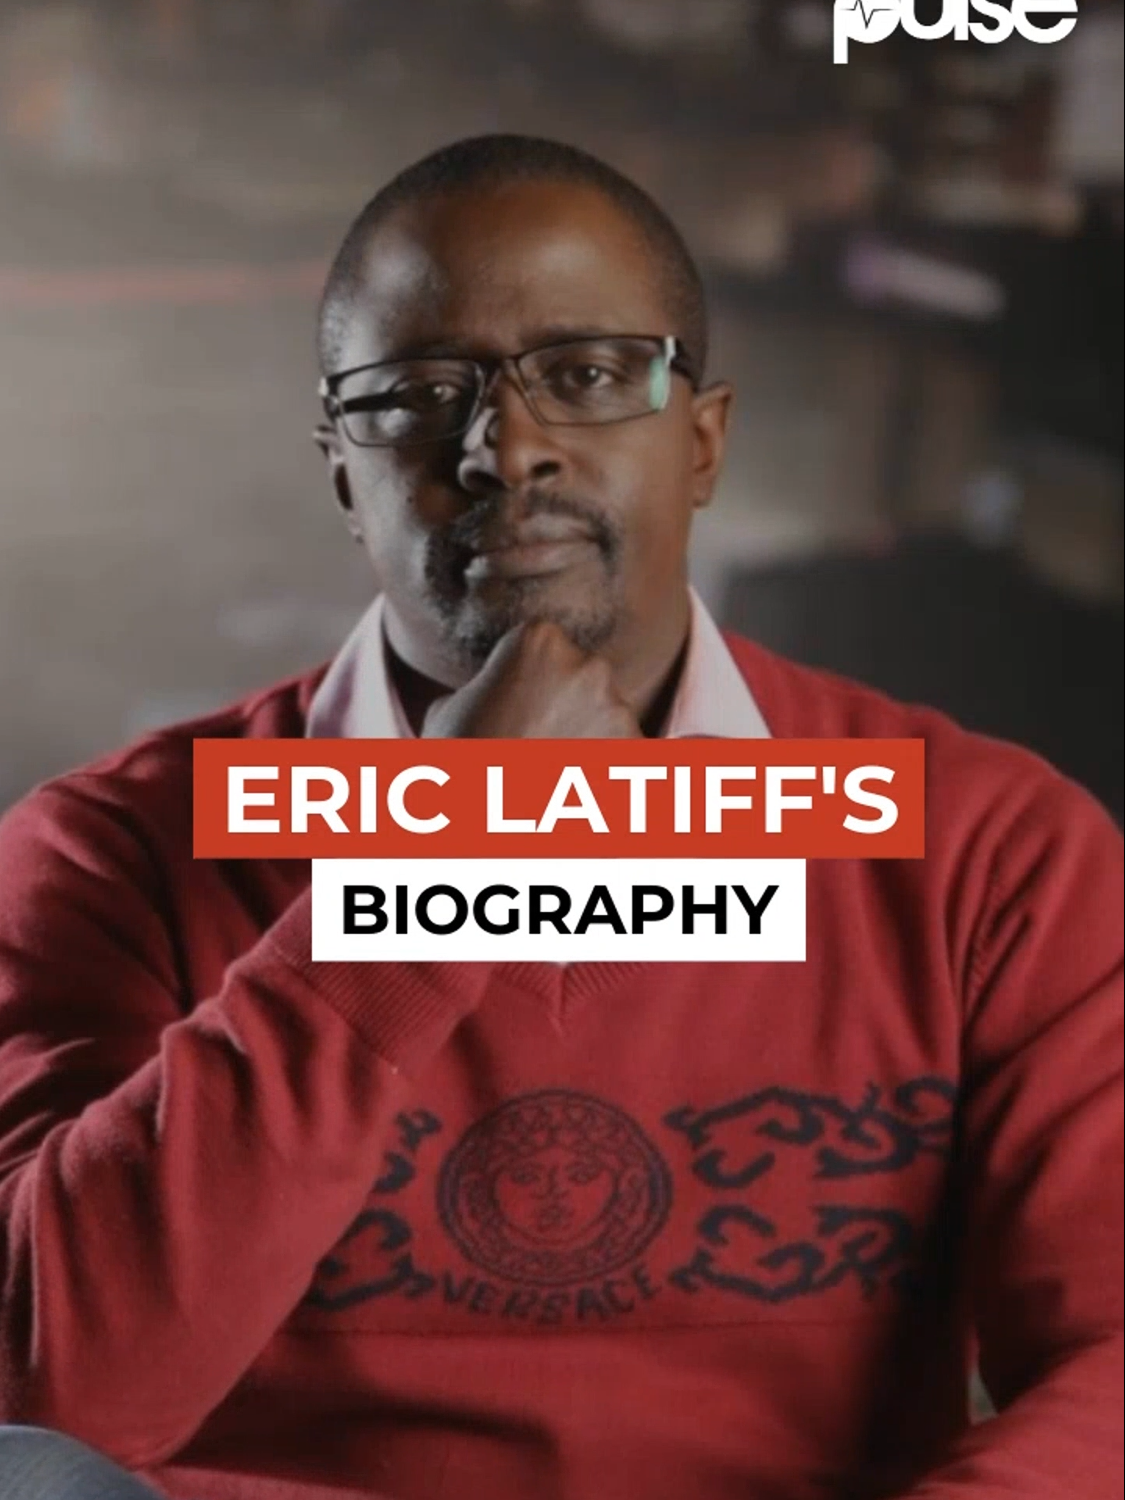 Latiff has grown popular for his show on Spice FM and thought-provoking questions on national issues. #PulseBiography #EricLatiff #PulseLiveKenya